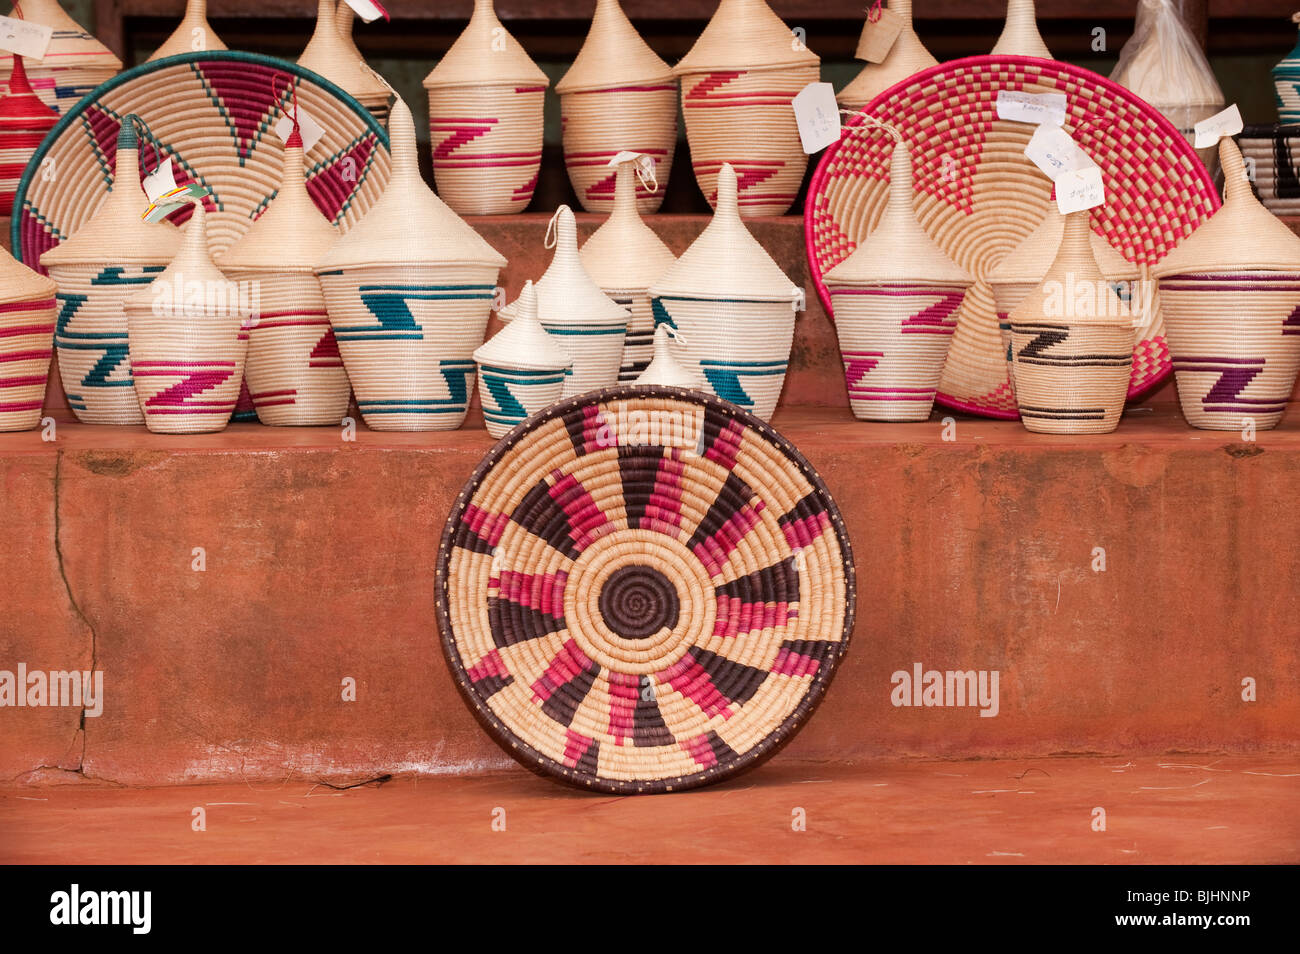 Traditionally weaved baskets on sale for tourists, made by a womans co-op. Rwanda. Stock Photo